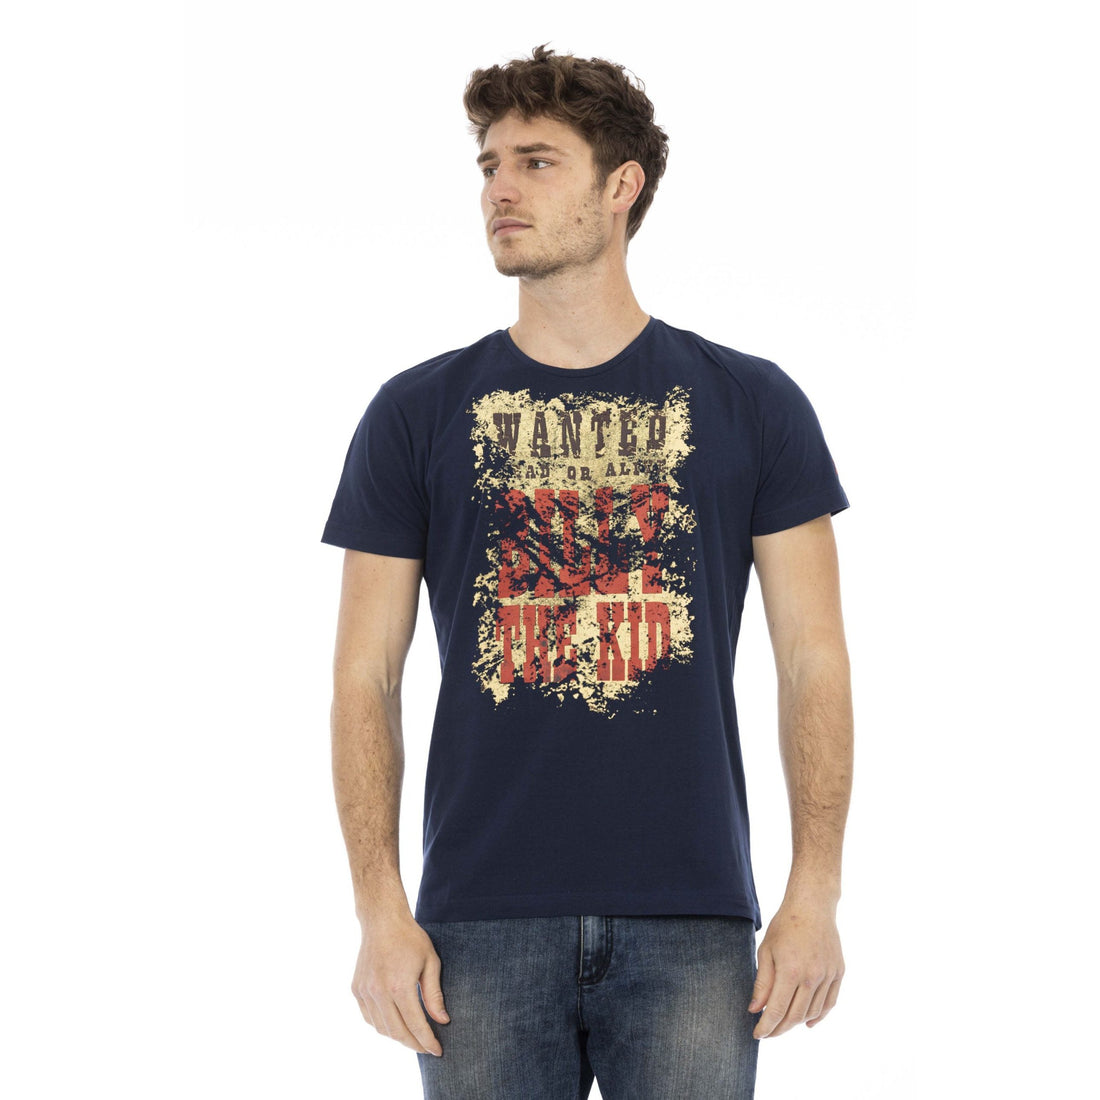 Trussardi Action Chic Blue Printed Short Sleeve Tee